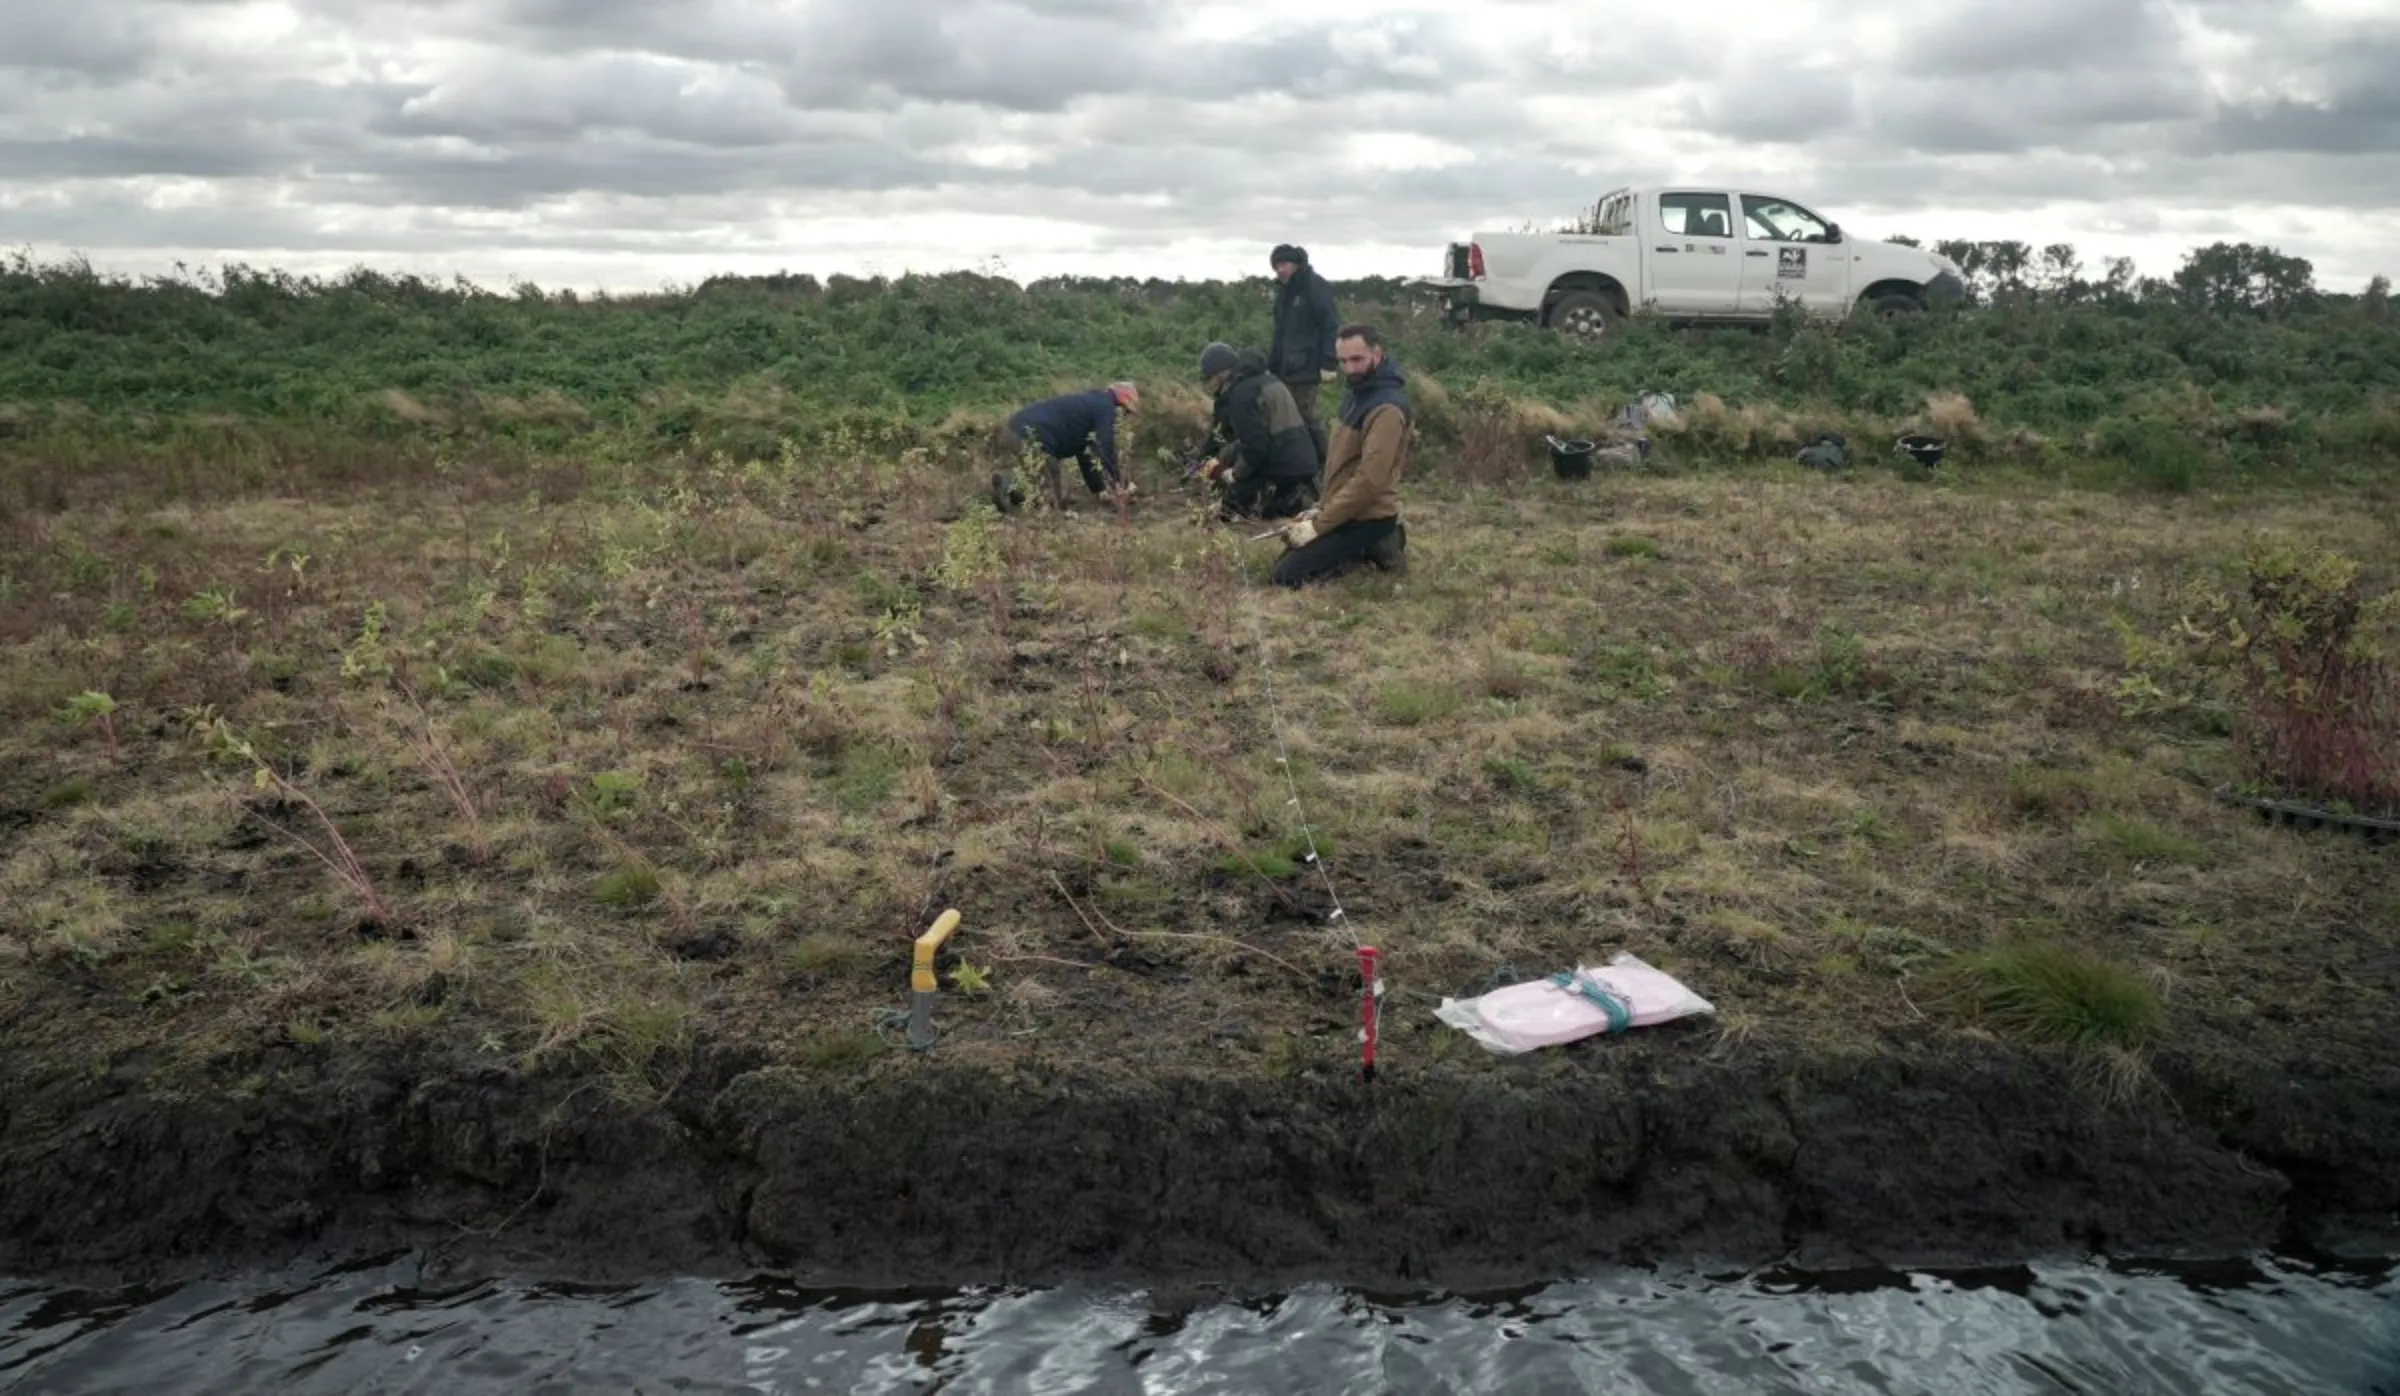 Volunteers from the Cambridgeshire Wildlife Trust’s Water Works project, plant crops suitable to waterlogged conditions in the peat-rich fields of the Fens near Holme, Britain, October 22, 2021. REUTERS/Natalie Thomas